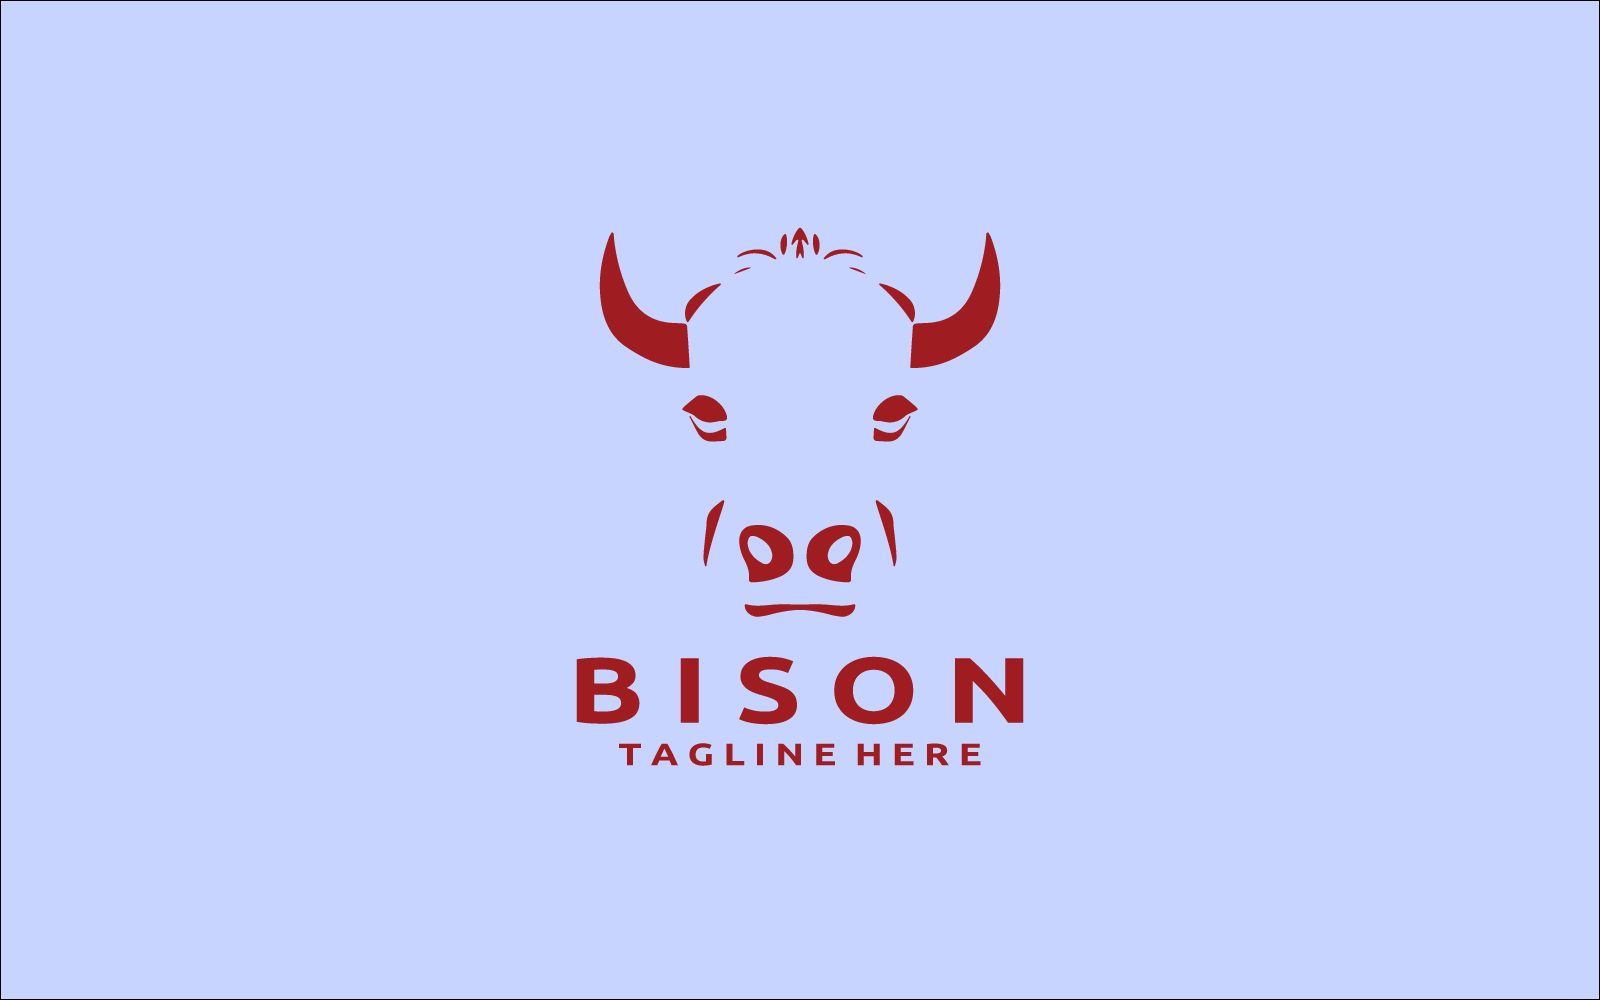 Template #381901 Logo Bison Webdesign Template - Logo template Preview